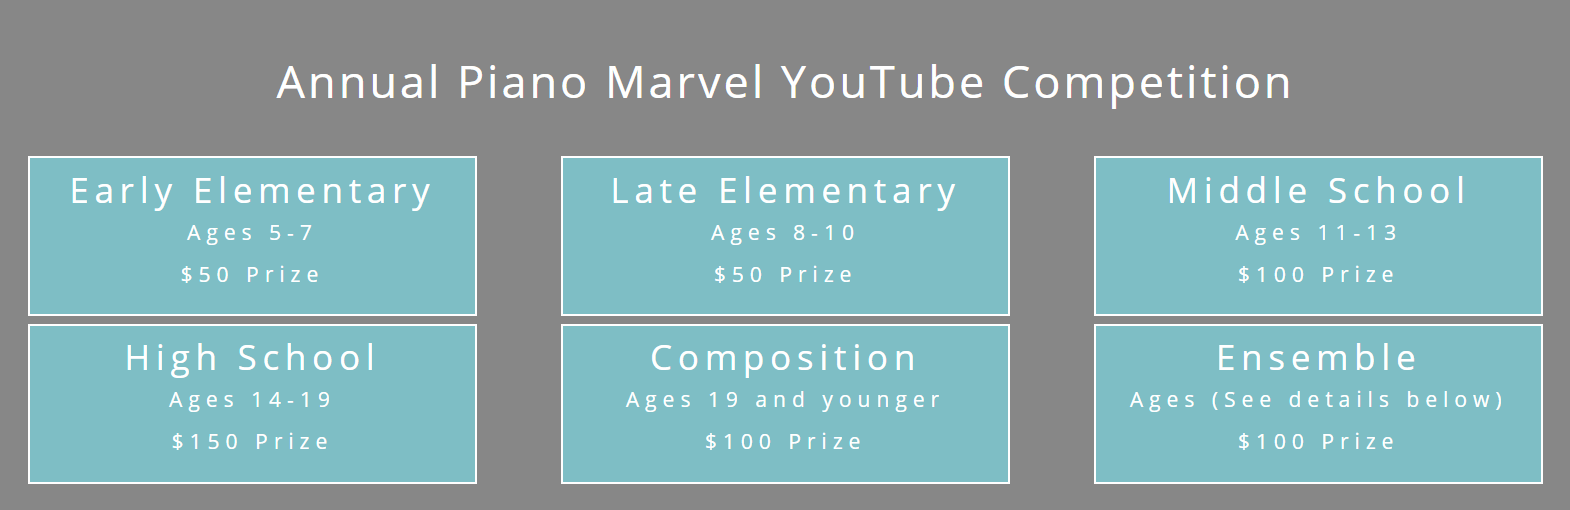 Piano Marvel YouTube Competition